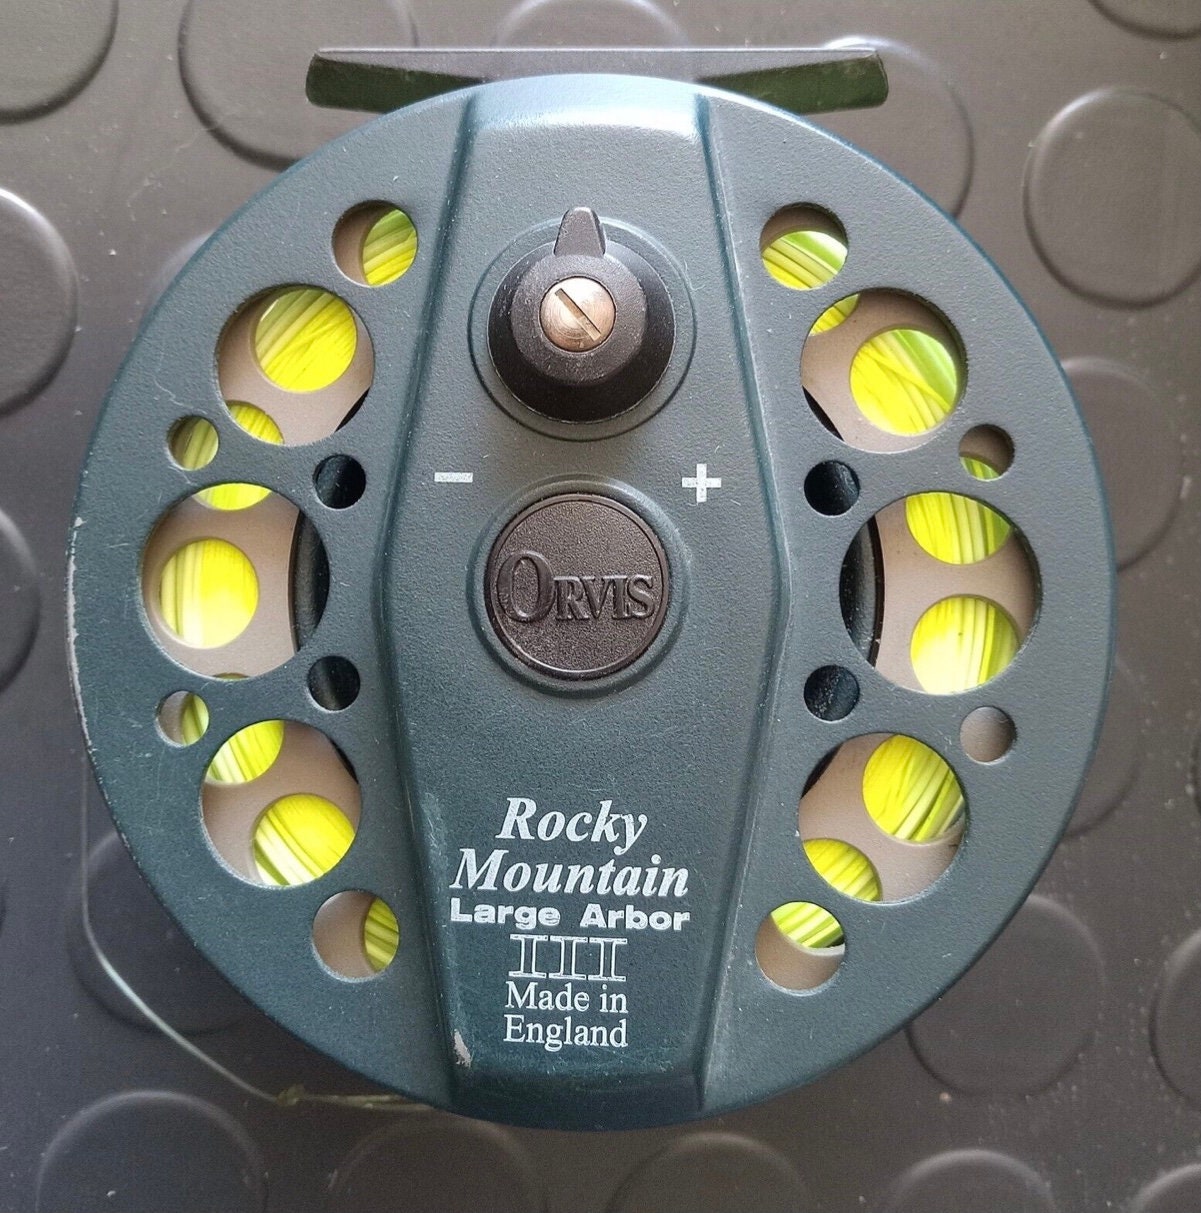 ORVIS ROCKY MOUNTAIN LARGE ARBOR III FLY REEL IN CASE MADE IN ENGLAND 海外 即決